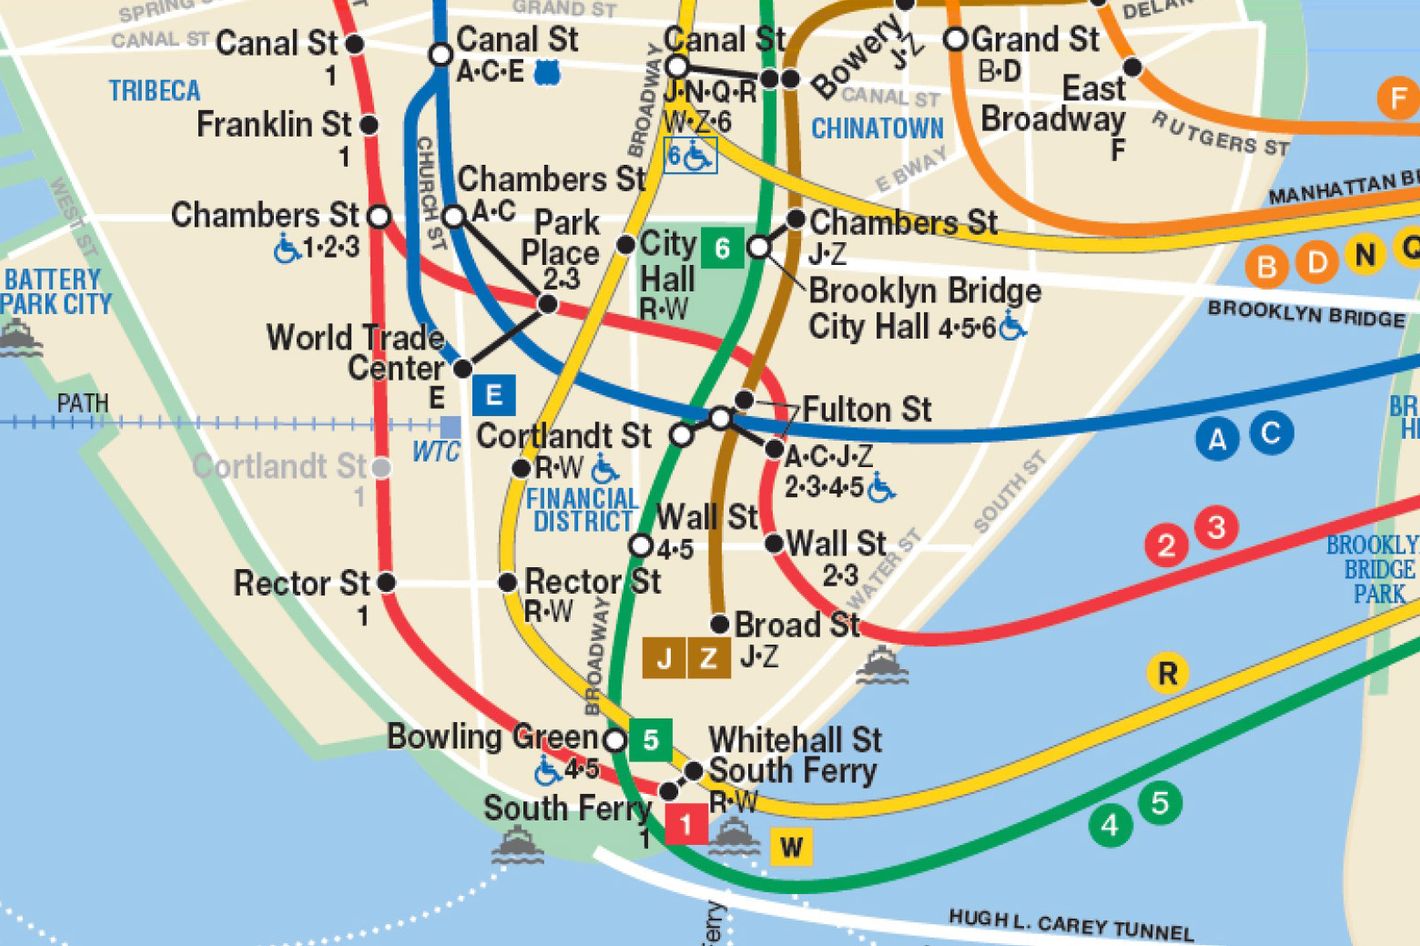 this new nyc subway map shows the second avenue line, so it has to